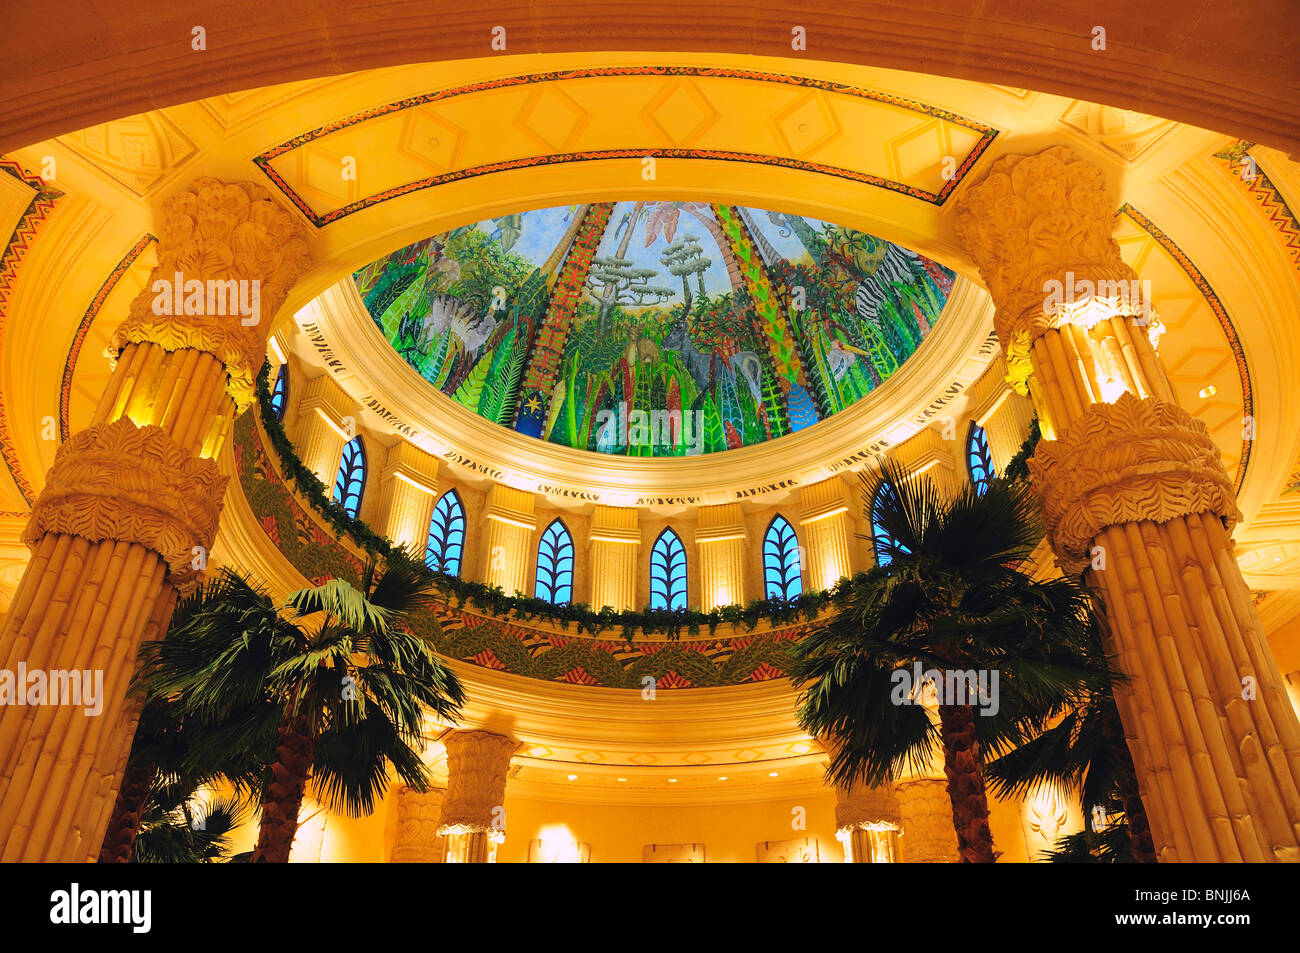 The Palace of the Lost City Sun city Entertainment Theme park North West South Africa indoors indoor inside dome buildling Stock Photo